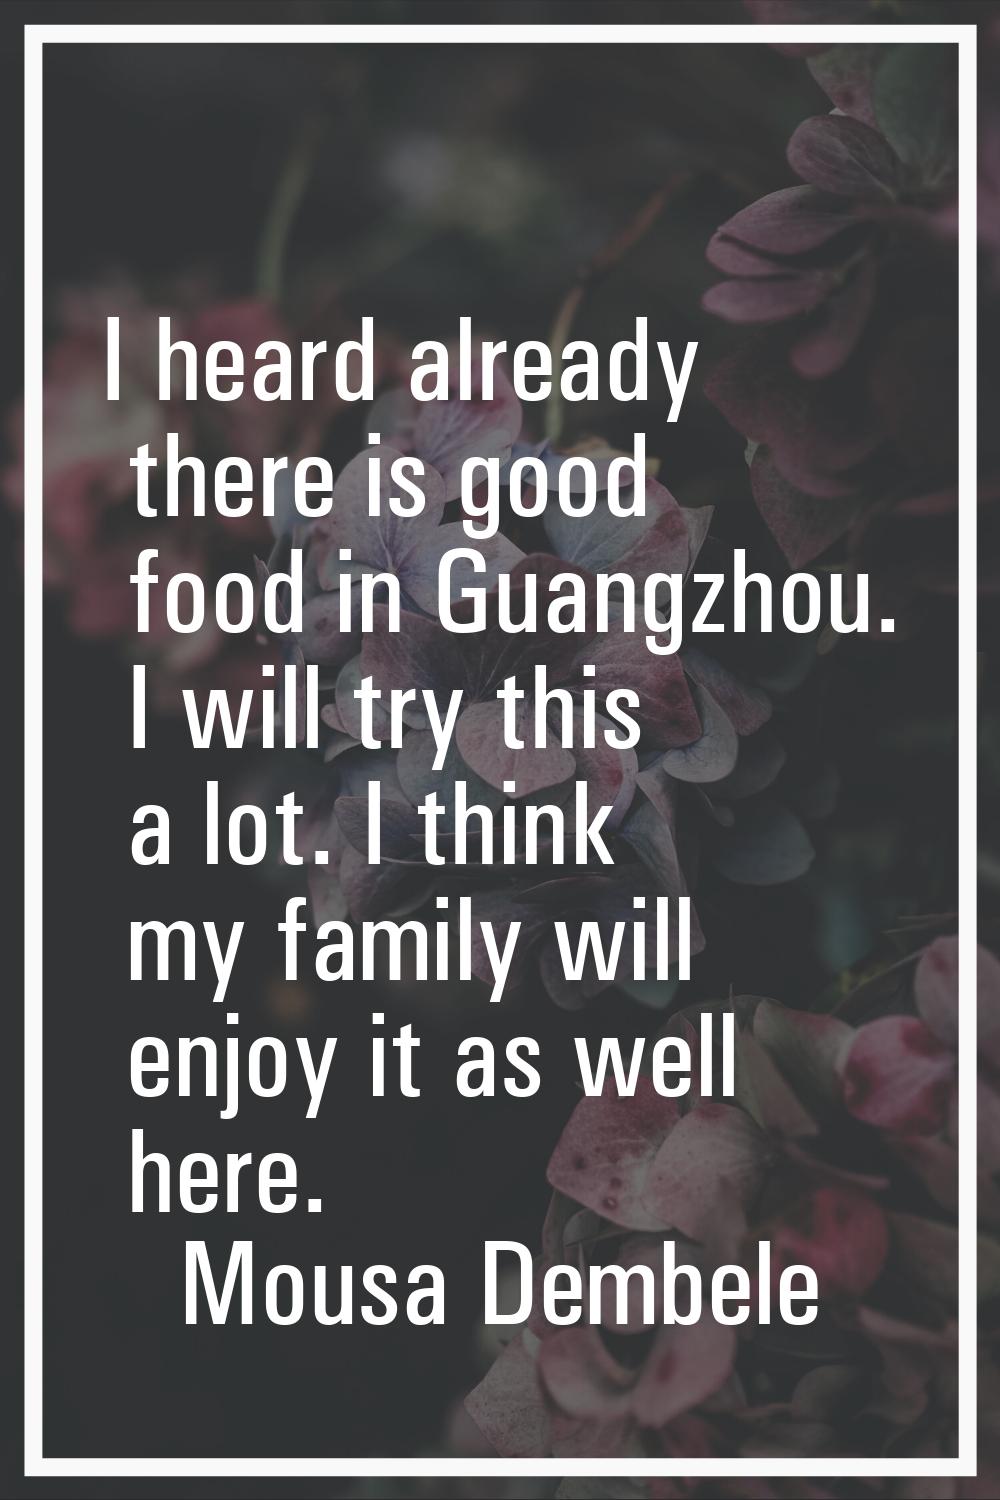 I heard already there is good food in Guangzhou. I will try this a lot. I think my family will enjo